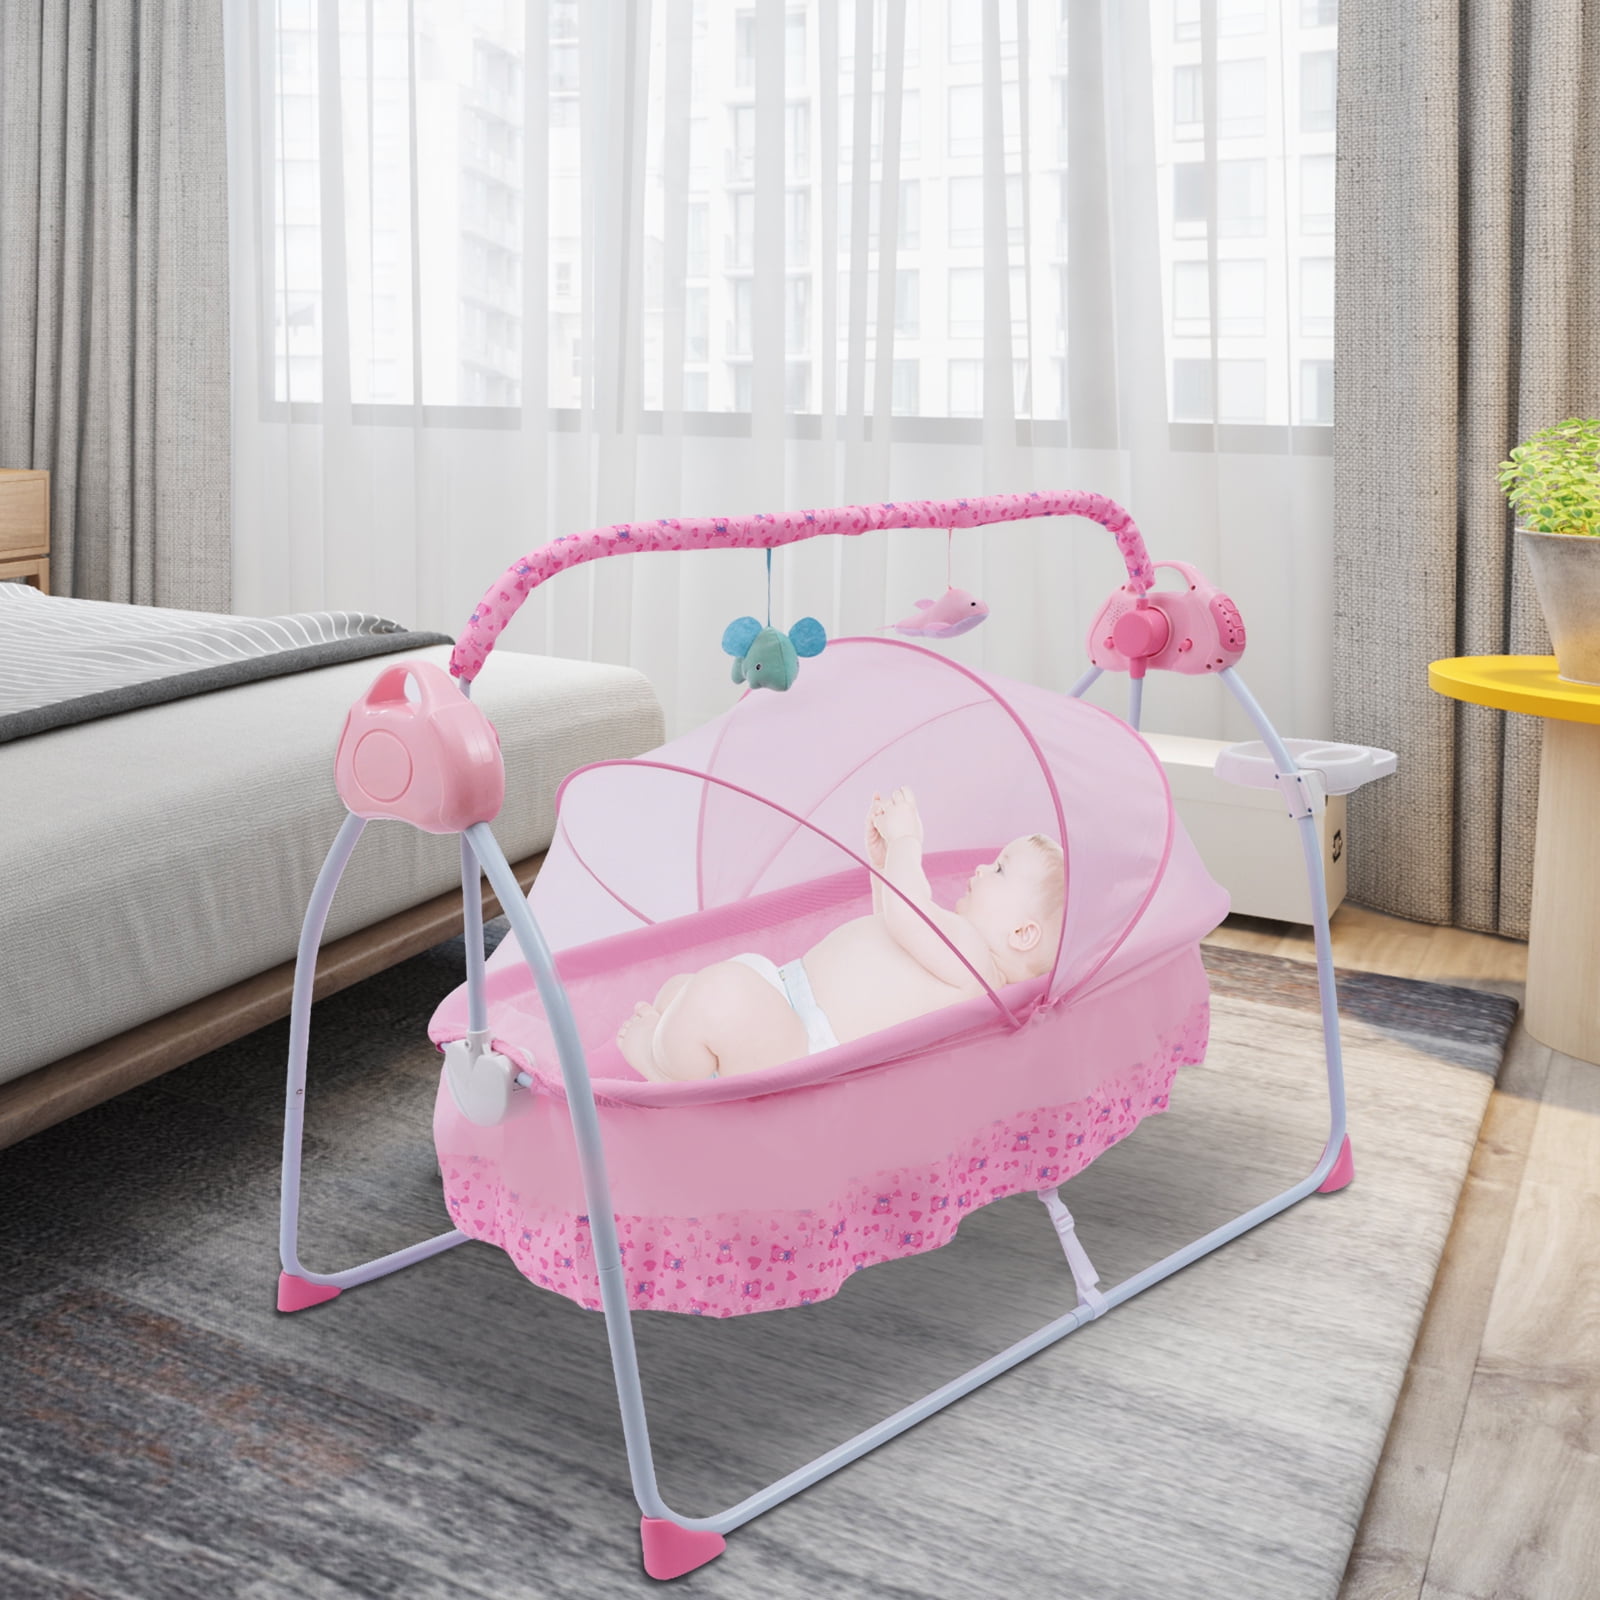 Electric Baby Crib Cradle Bluetooth Music Infant Auto-Swing Bed Rocker